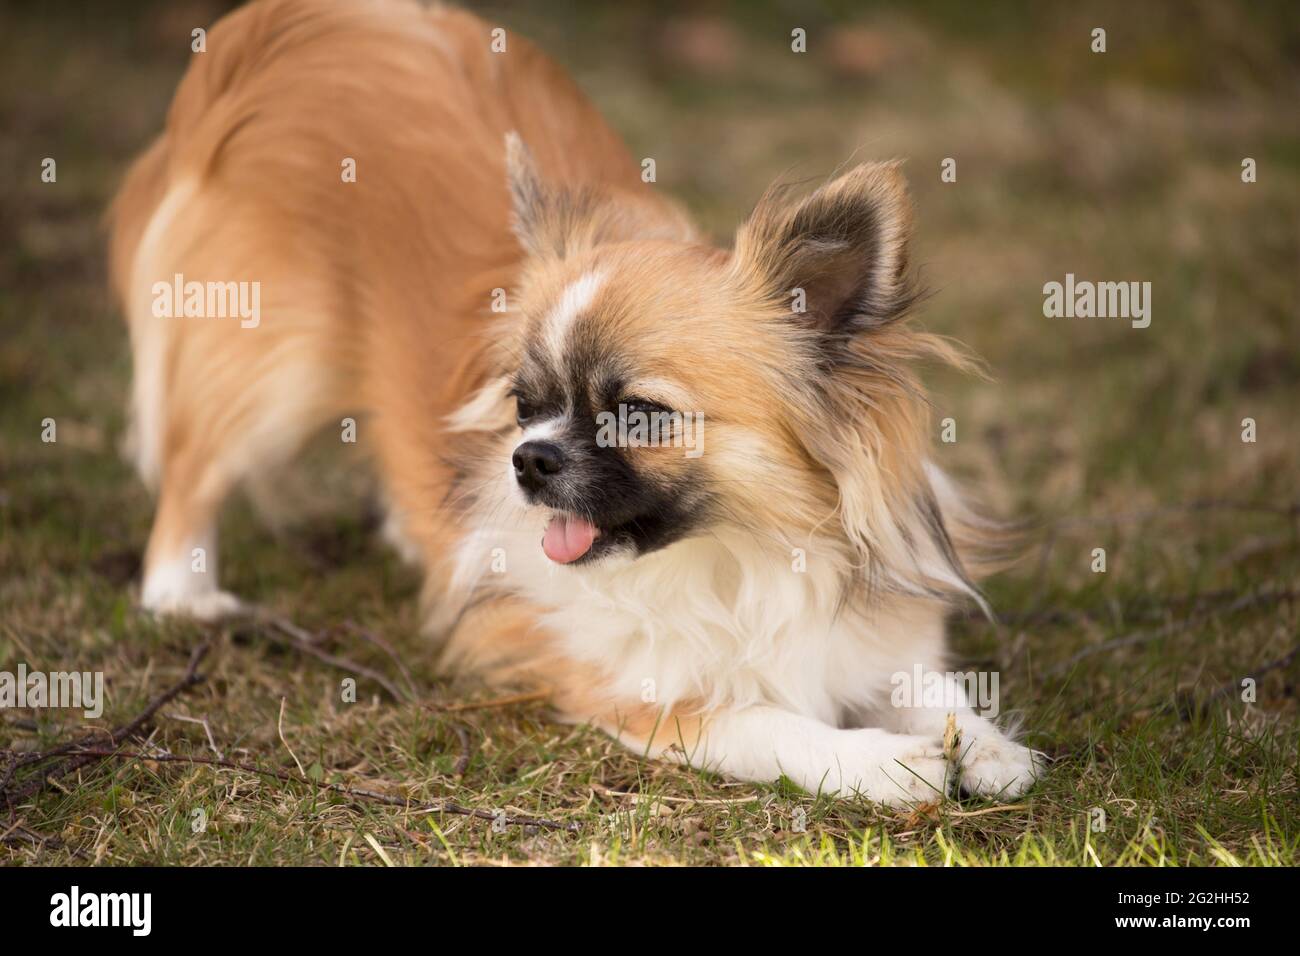 Long haired chihuahua, young male dog, outdoor, garden Stock Photo